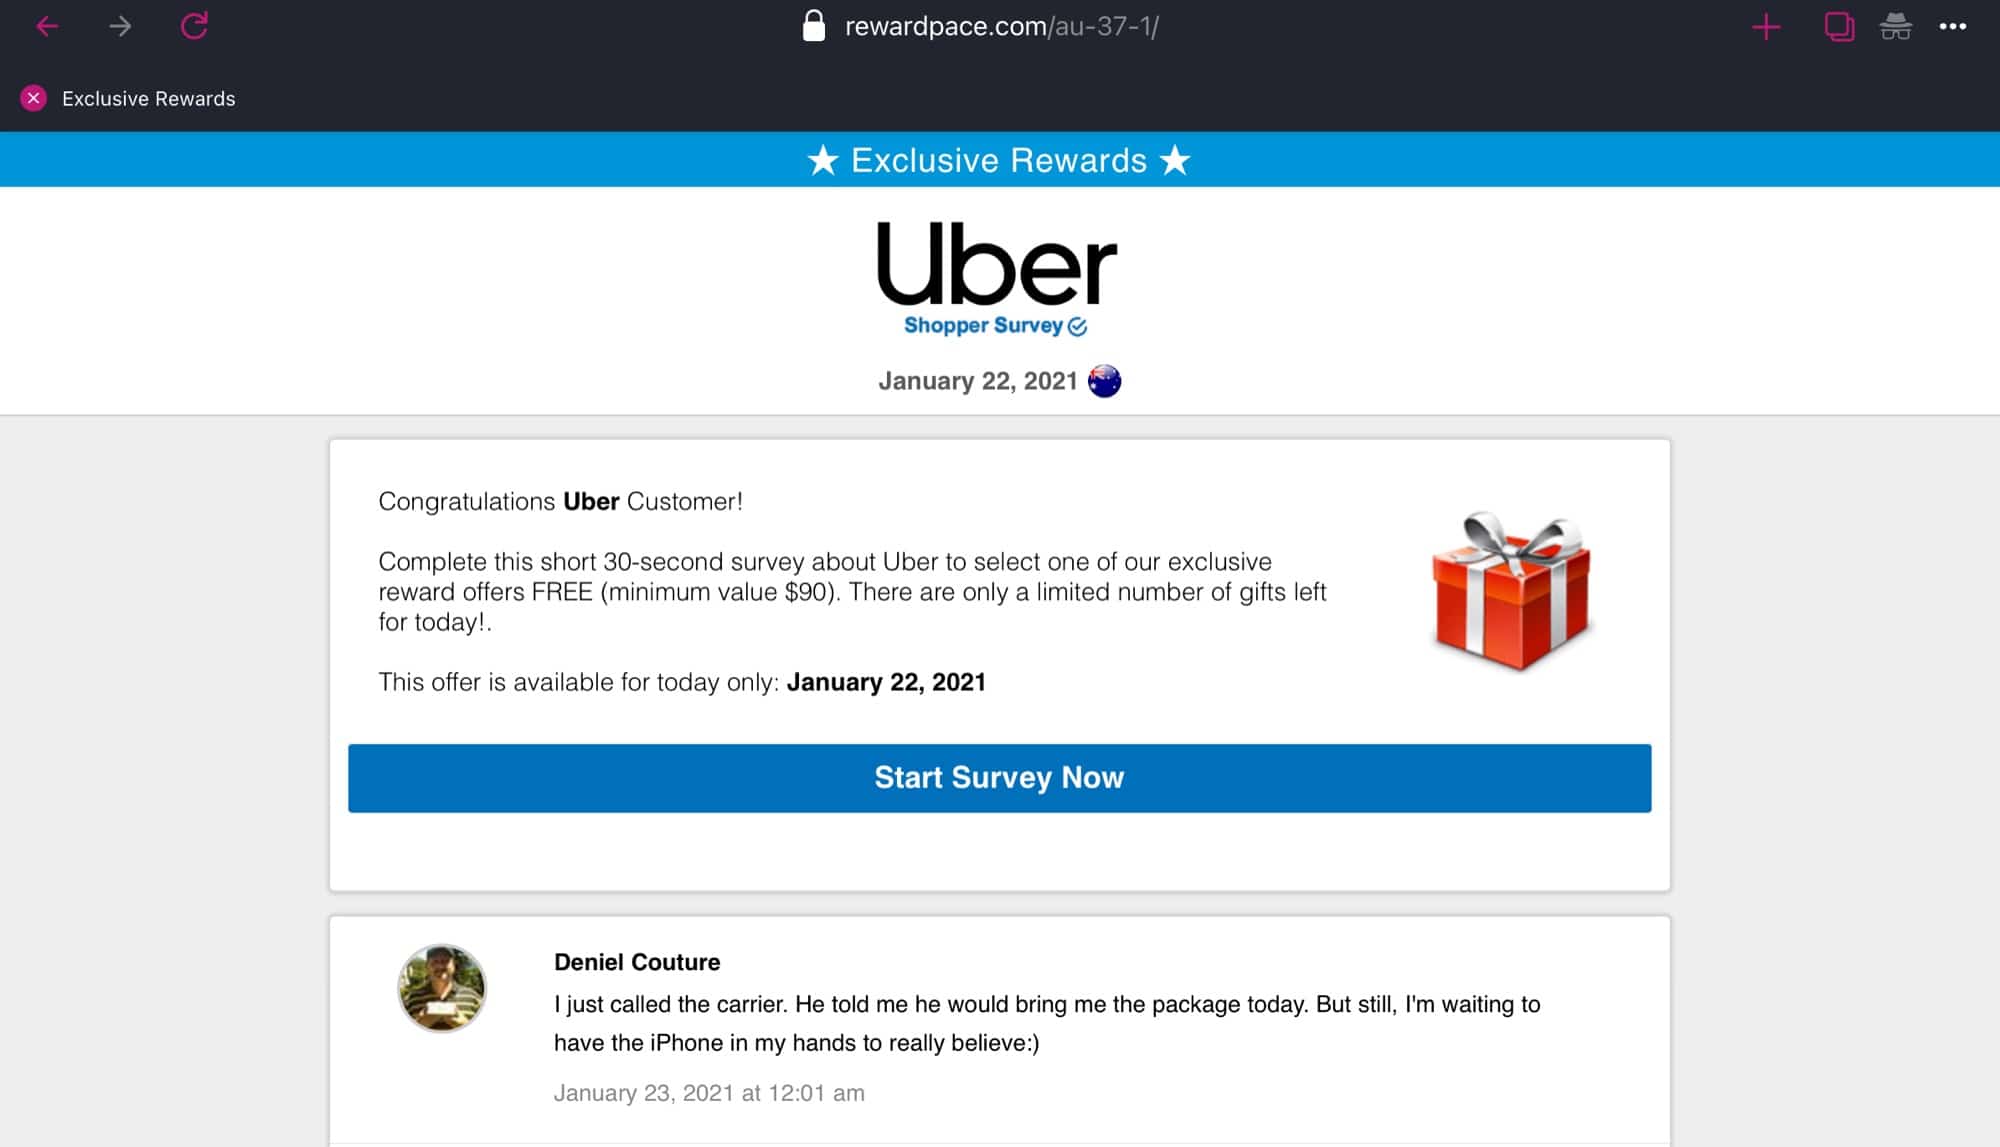 The fake Uber survey site for the Uber Shoppers scam.